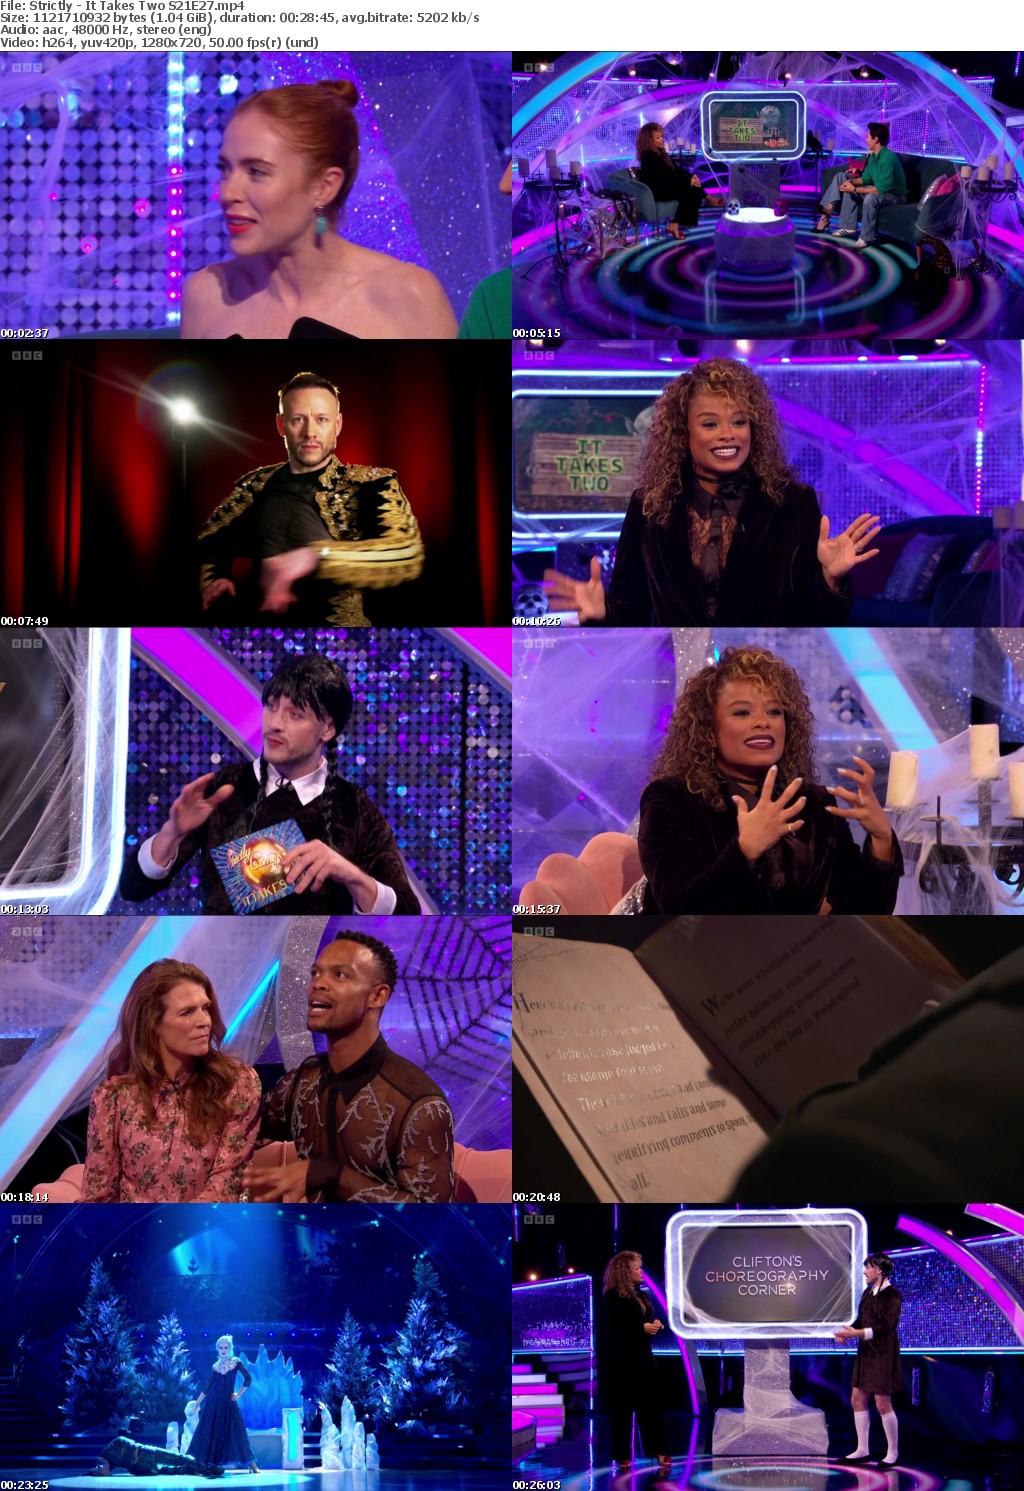 Strictly - It Takes Two S21E27 (1280x720p HD, 50fps, soft Eng subs) PROPER Strictly - It Takes Two S21E27 (1280x720p HD, 50fps, soft Eng subs) PROPER